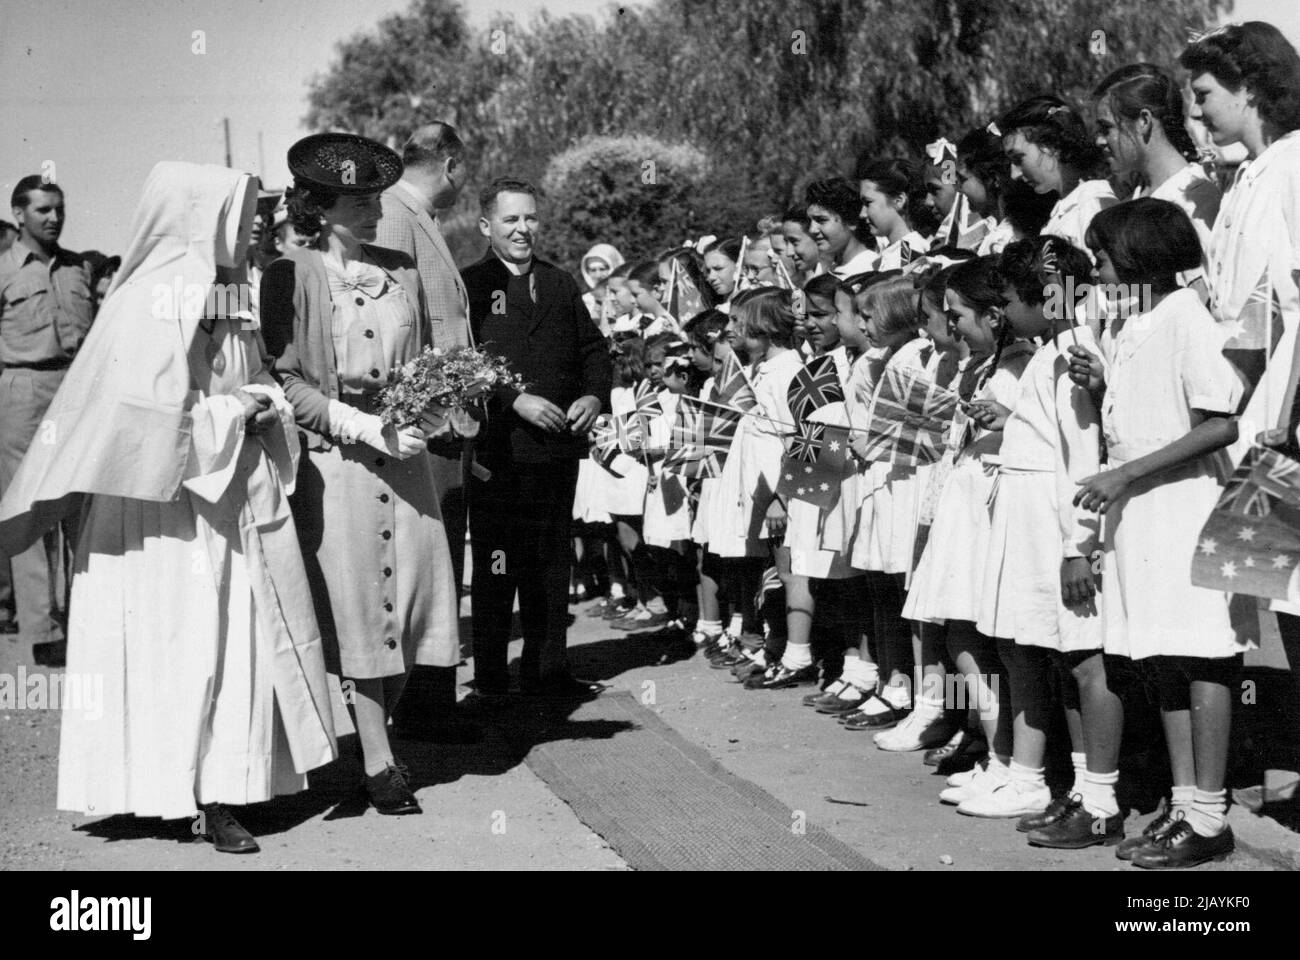 Duke Of Gloucester's Tour -- Their Royal Highness the Duke and Duchess of Gloucester meet school-children who gave then an enthusiastic welcome at Tennant Greek, which they visited recently on their tour. January 01, 1945. Stock Photo